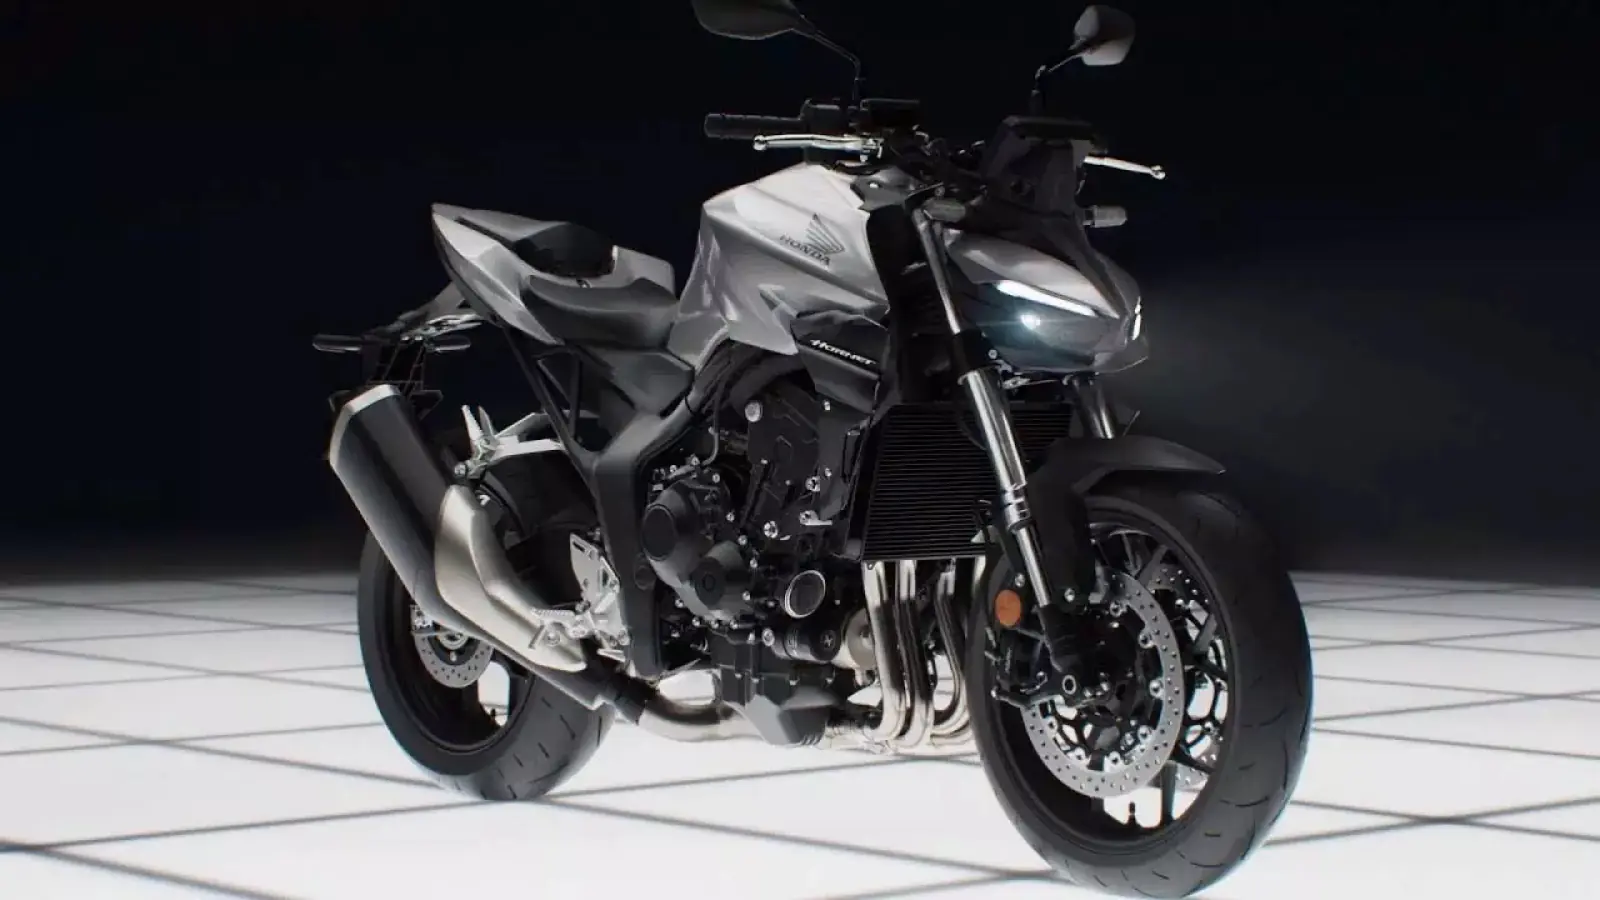 Honda has patented the design of CB1000 Hornet in India, it can be launched with these changes